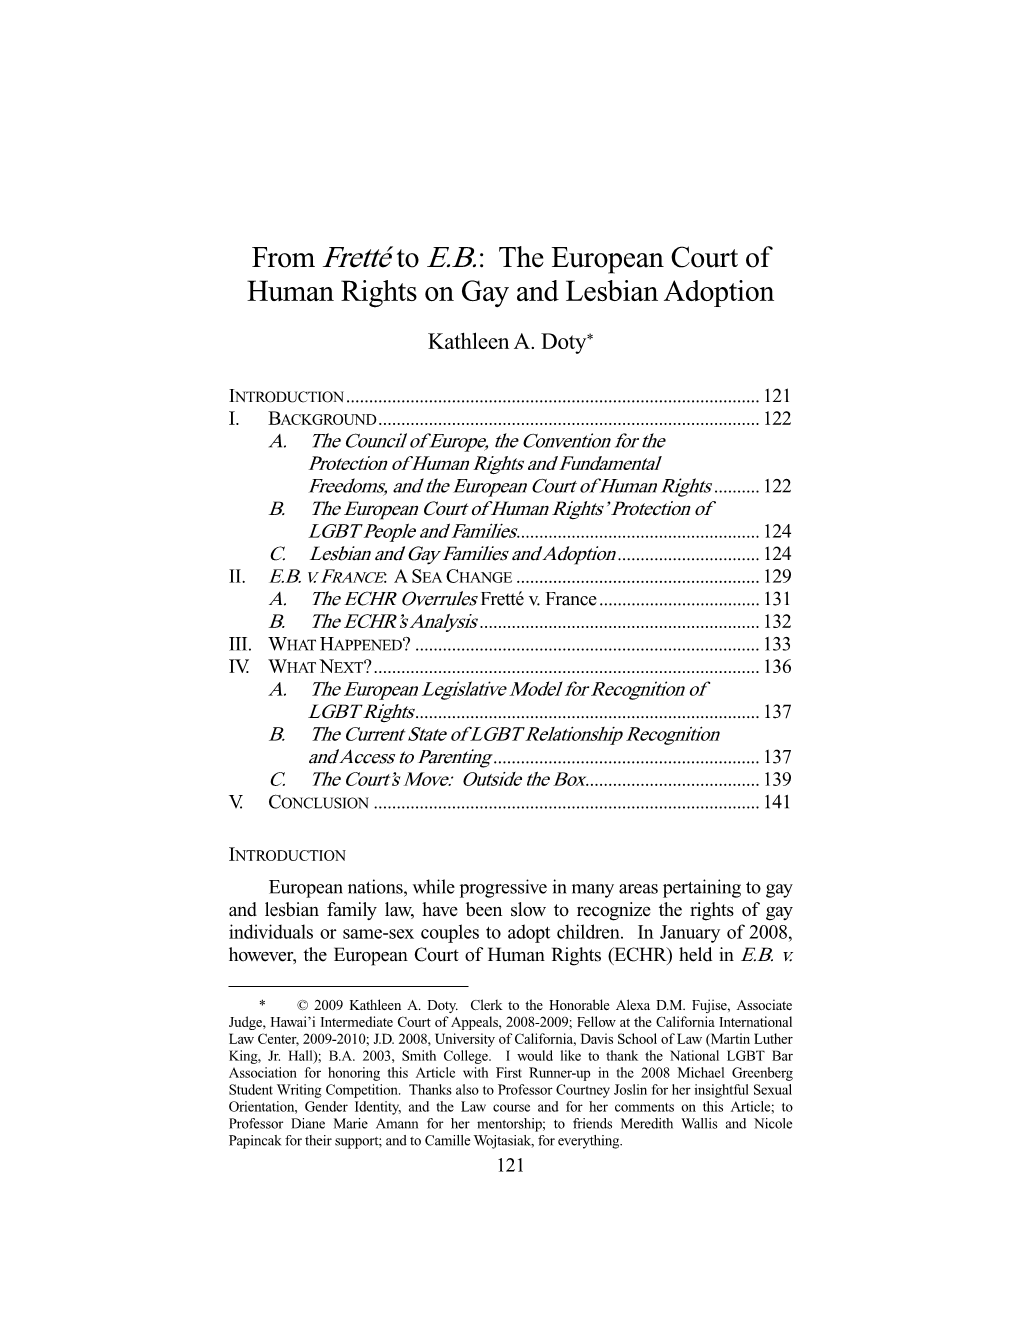 The European Court of Human Rights on Gay and Lesbian Adoption